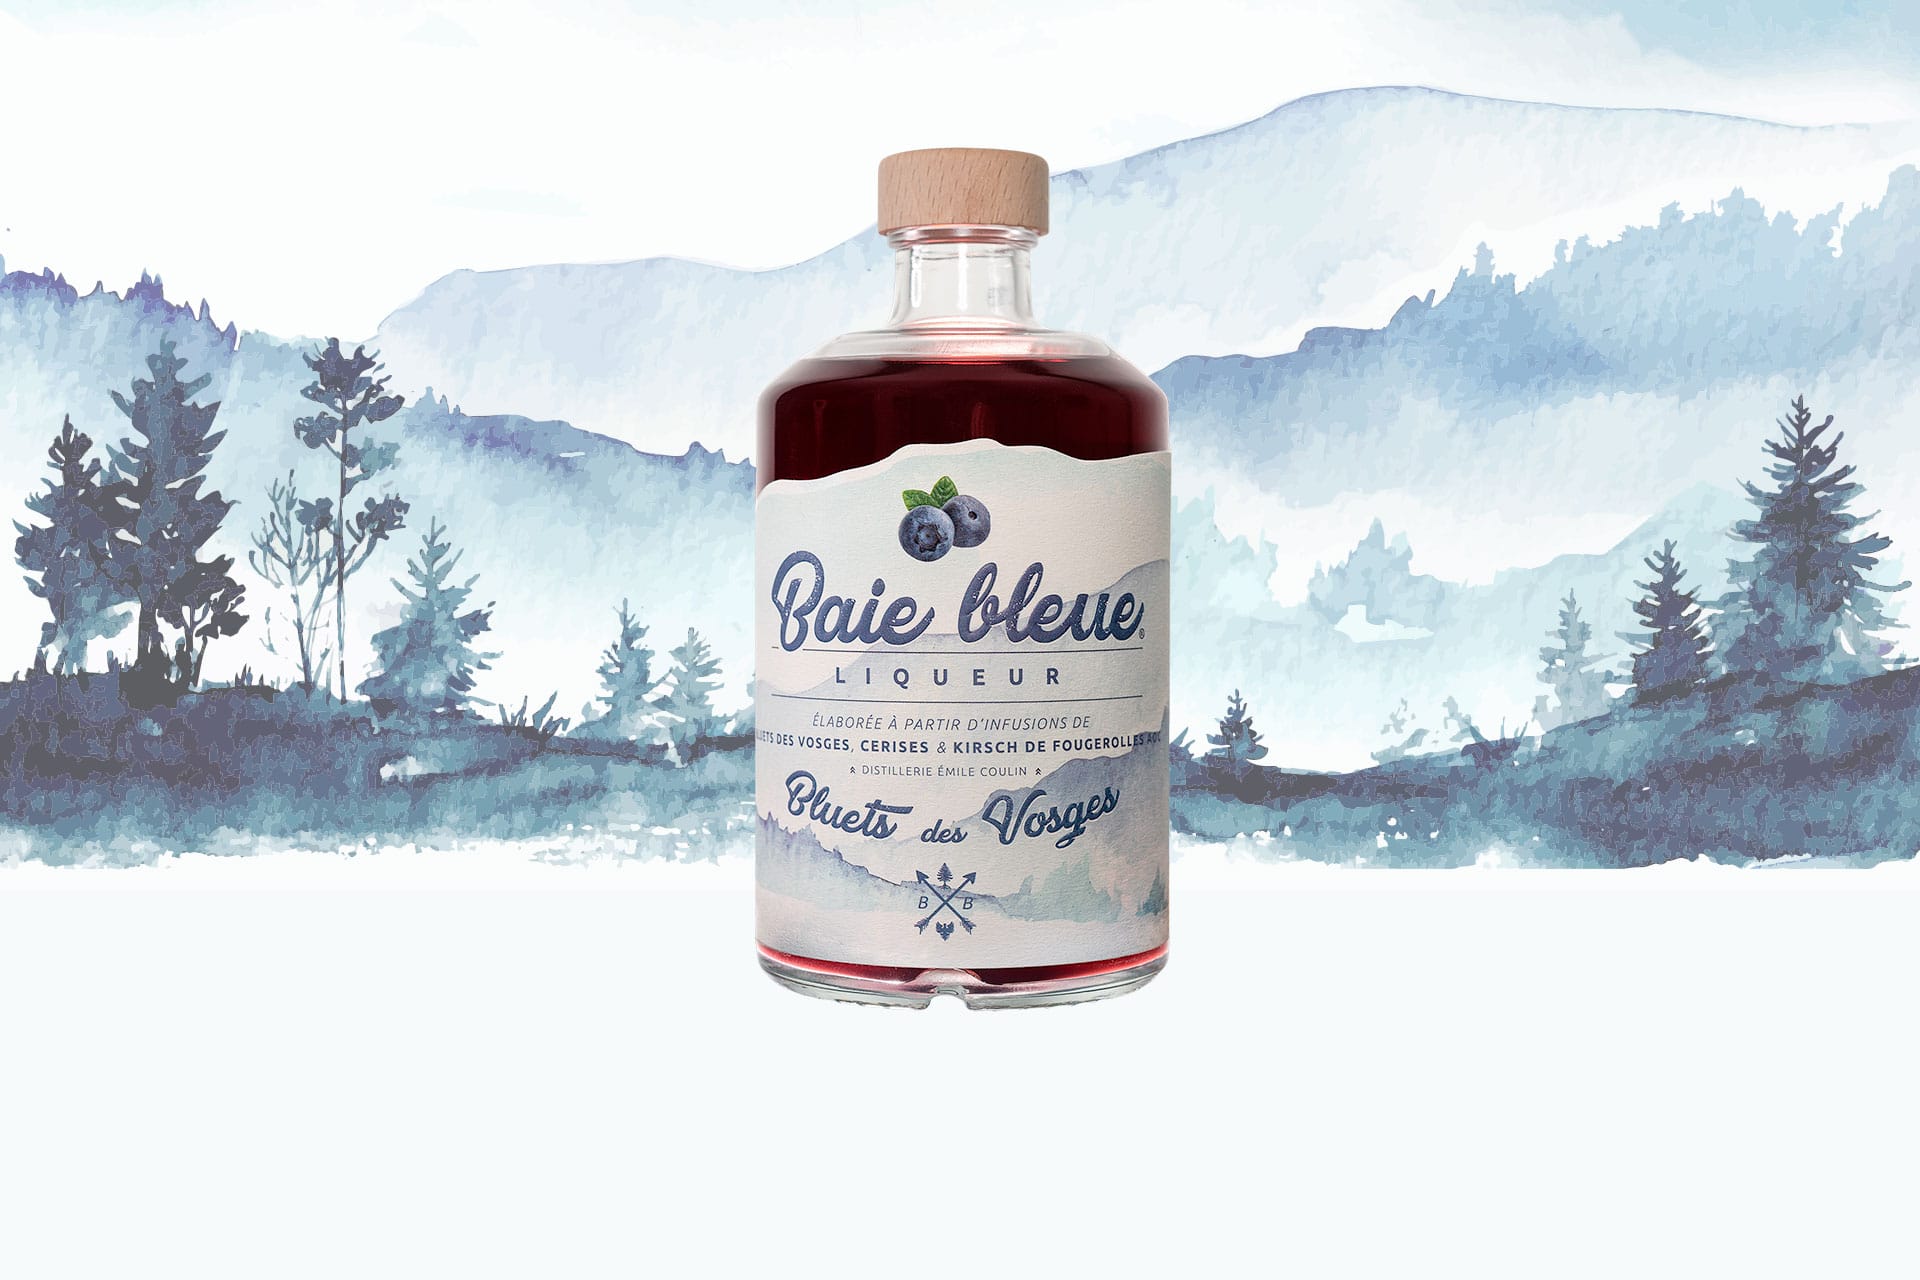 Blueberry liqueur made from Vosges blueberries